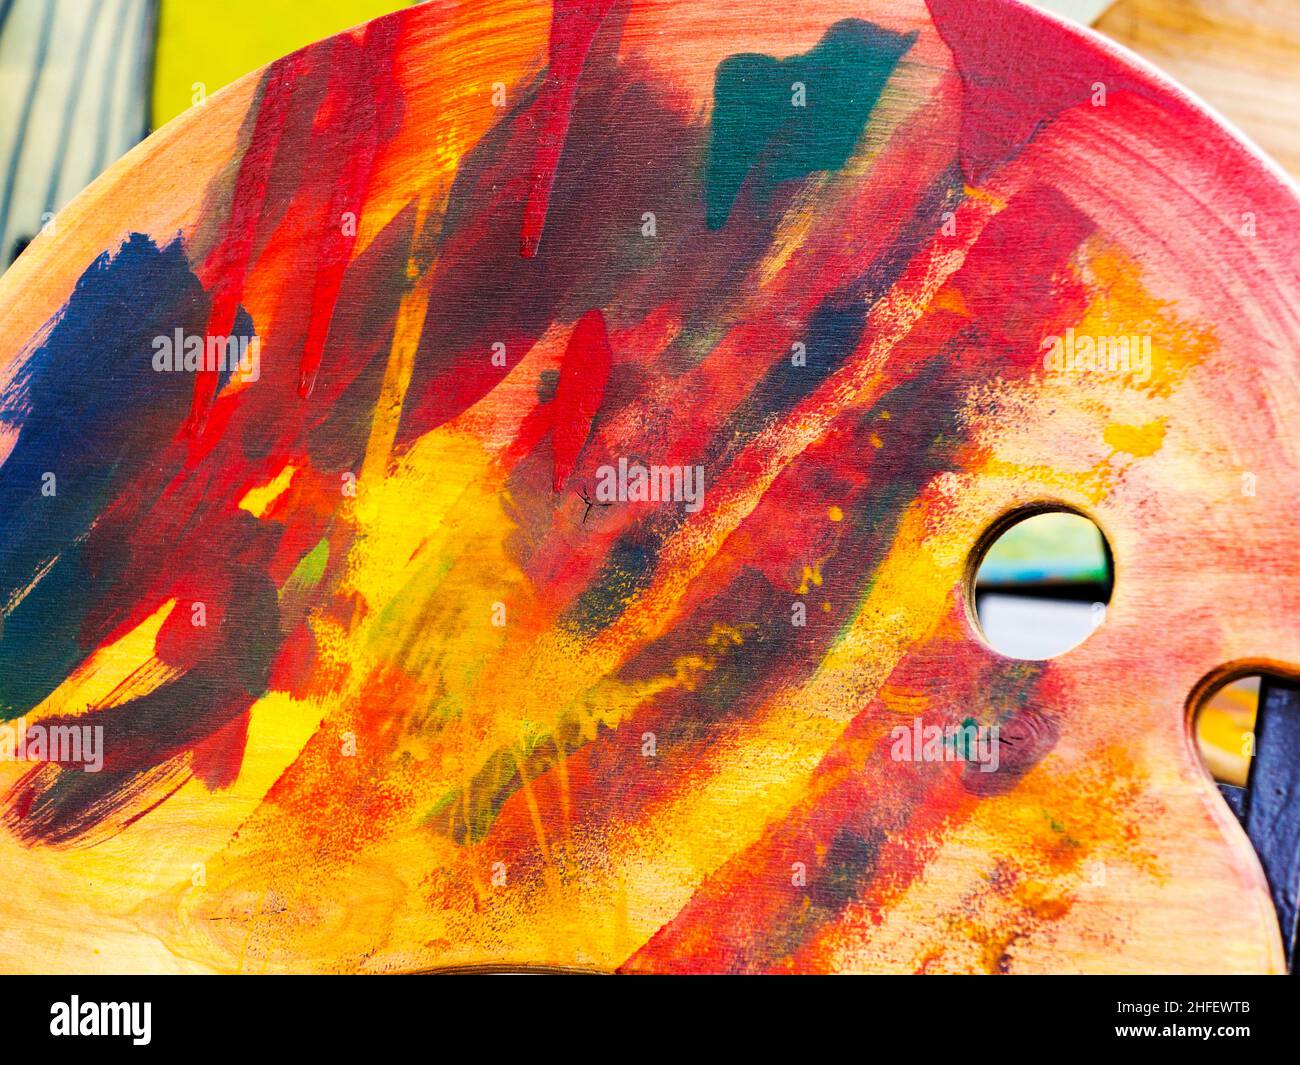 Artist palette with different colors isolated on a wooden surface. Selective focus Stock Photo